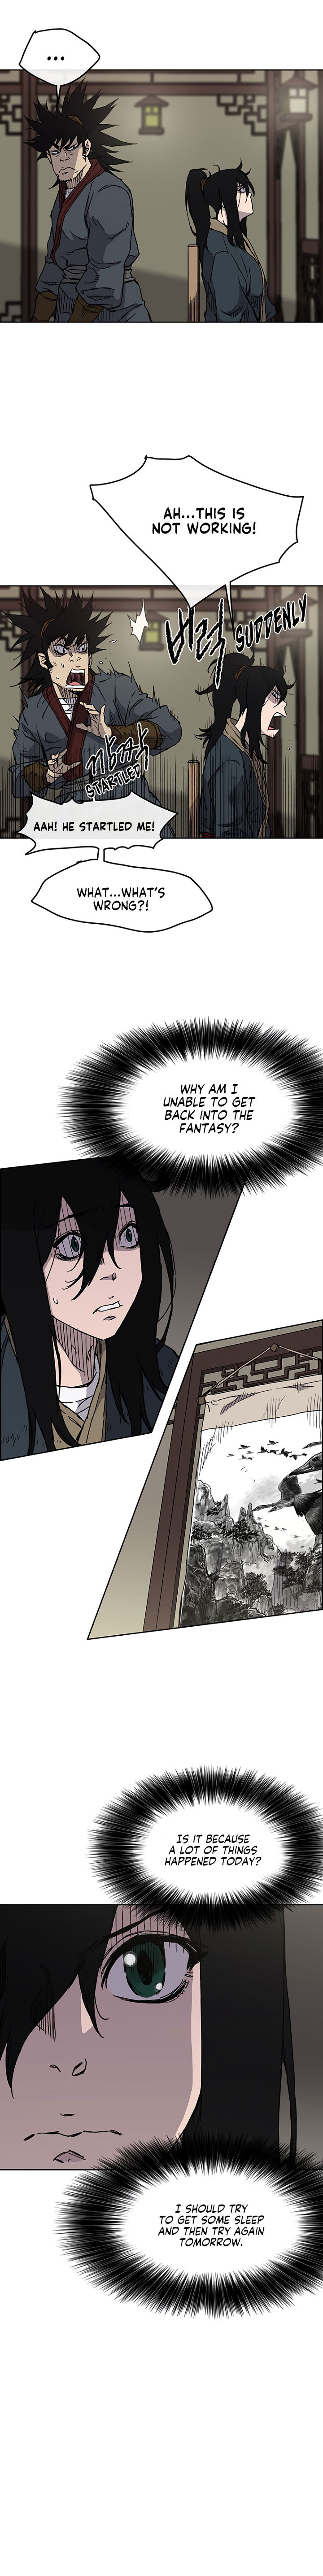 The Undefeatable Swordsman - Chapter 8 Page 3